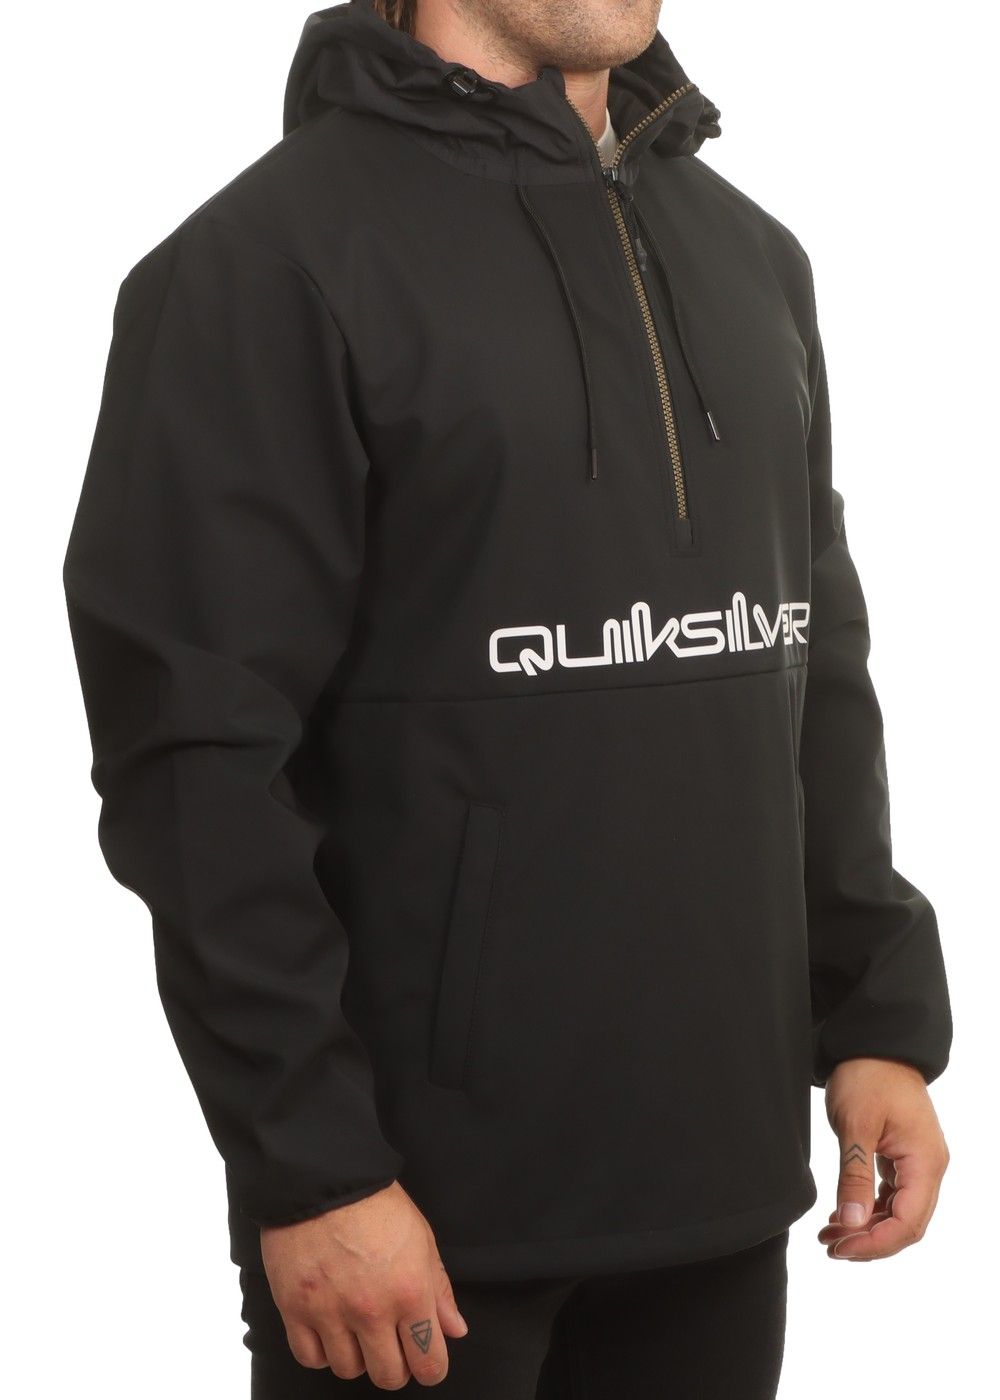 Quiksilver Live For The Ride Tech Hoodie Black